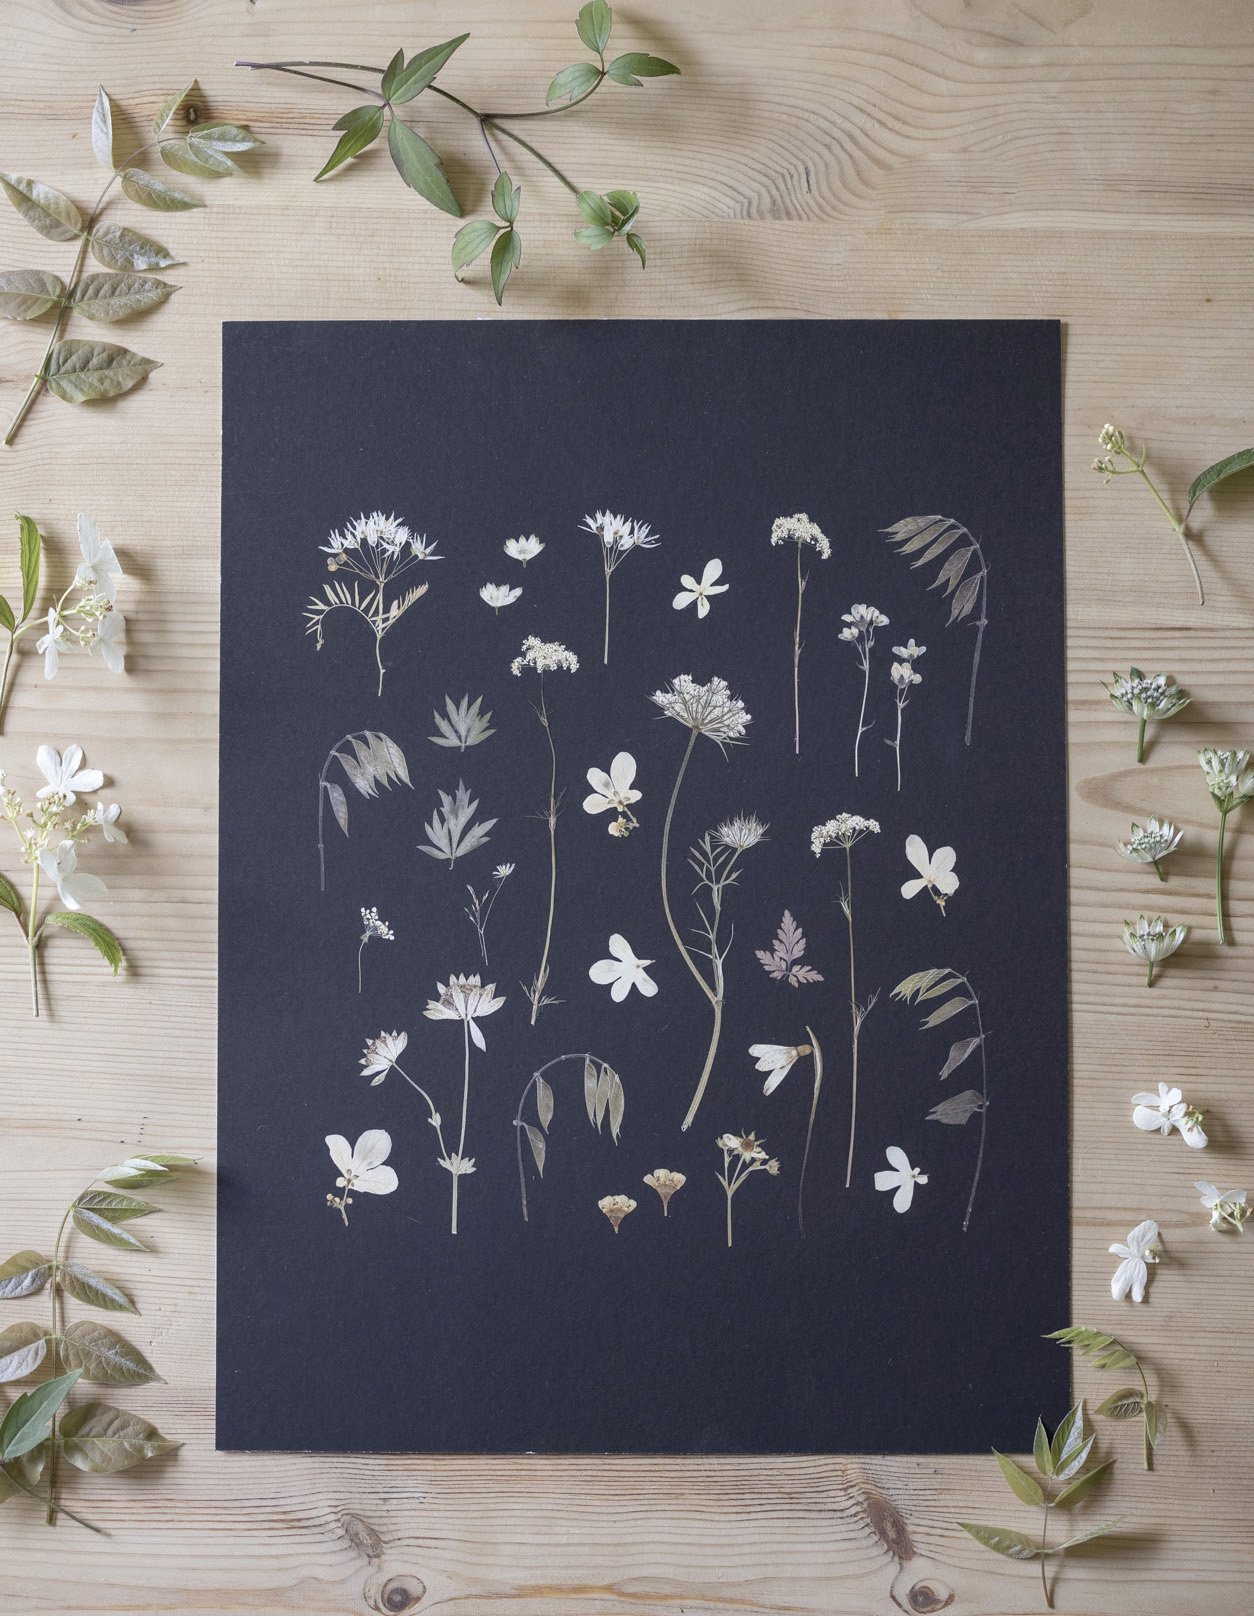 Giclée print featuring astrantia, viburnum and wisteria from my garden